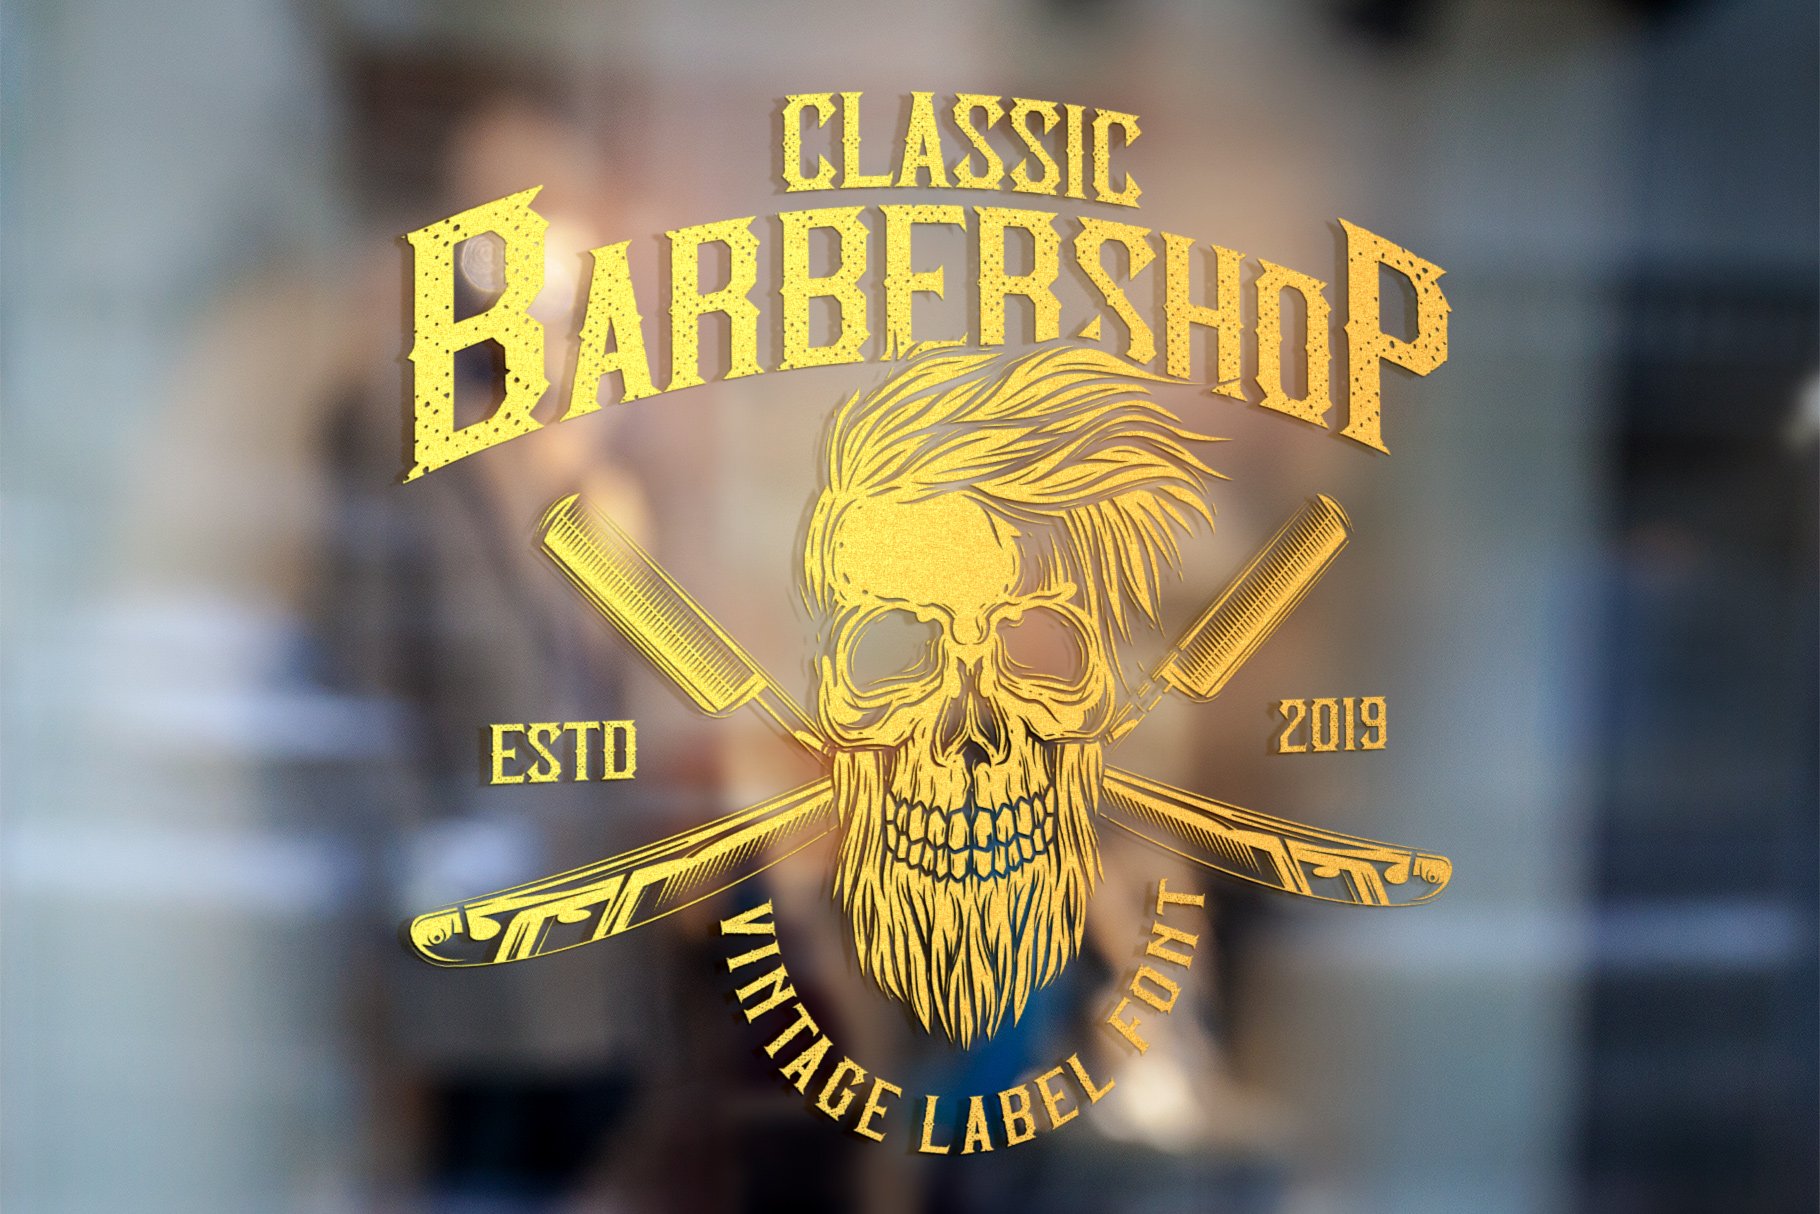 Classic BarberShop cover image.